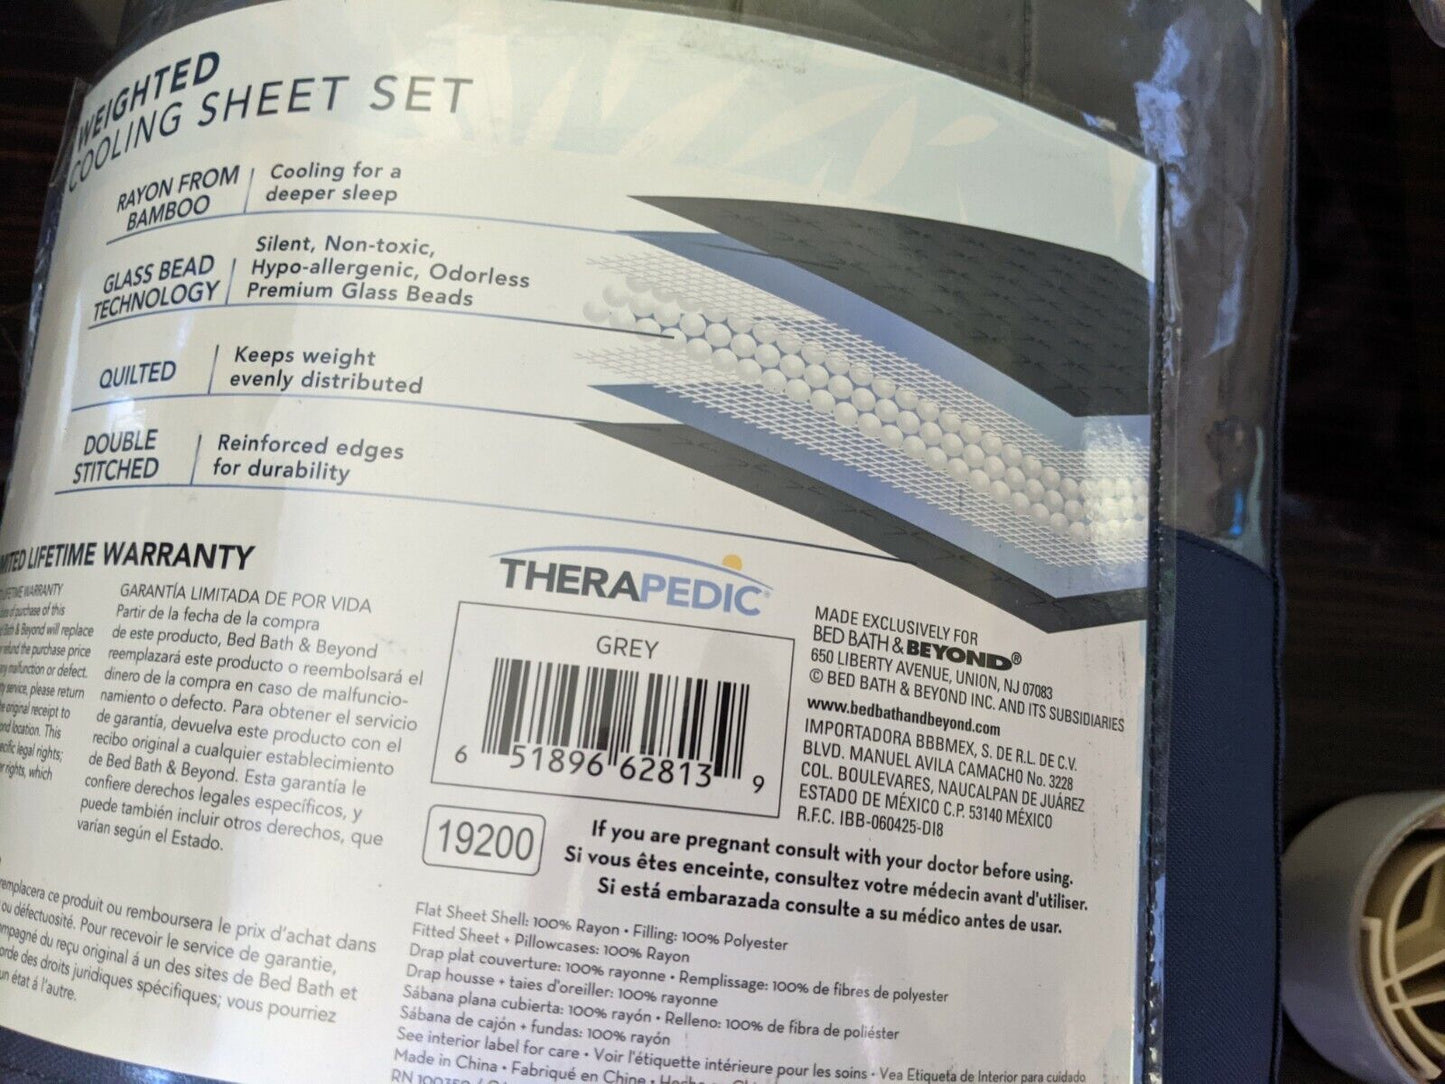 Therapedic Rayon Made From Bamboo 300-Thread-Count 4.5 lb. Weighted Full Sheet